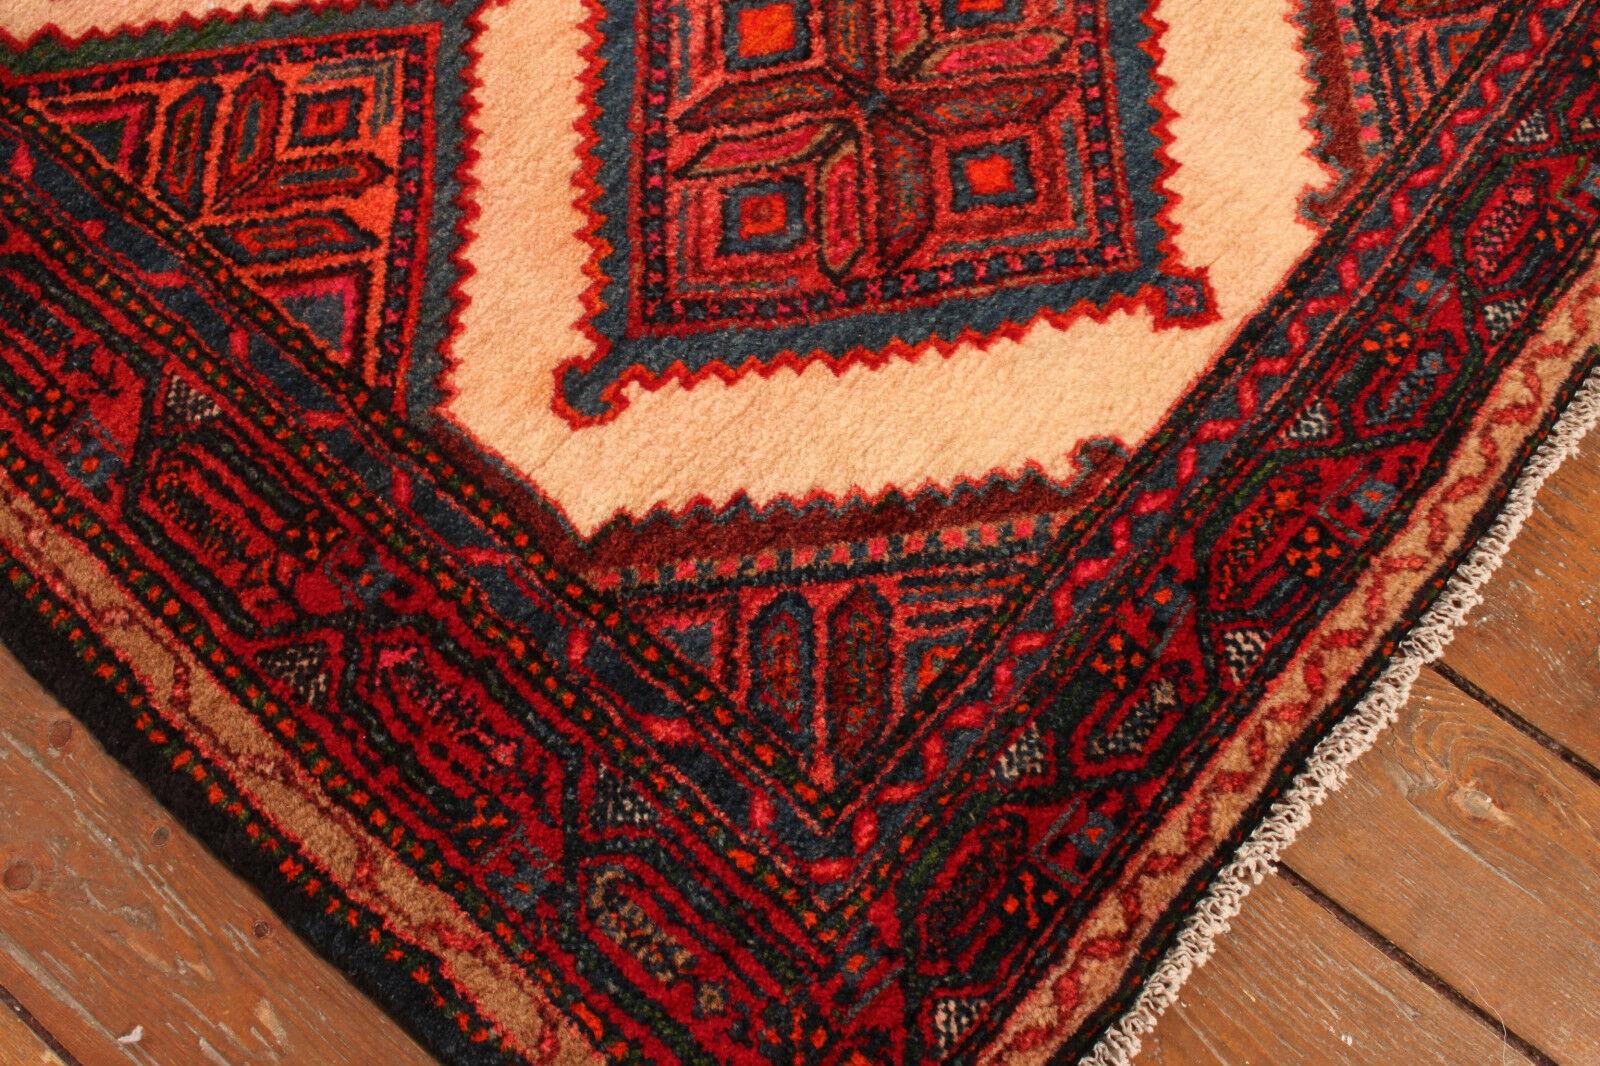 Handmade Vintage Persian Style Hamadan Rug 3.5' x 5.5', 1970s - 1T28 In Good Condition For Sale In Bordeaux, FR